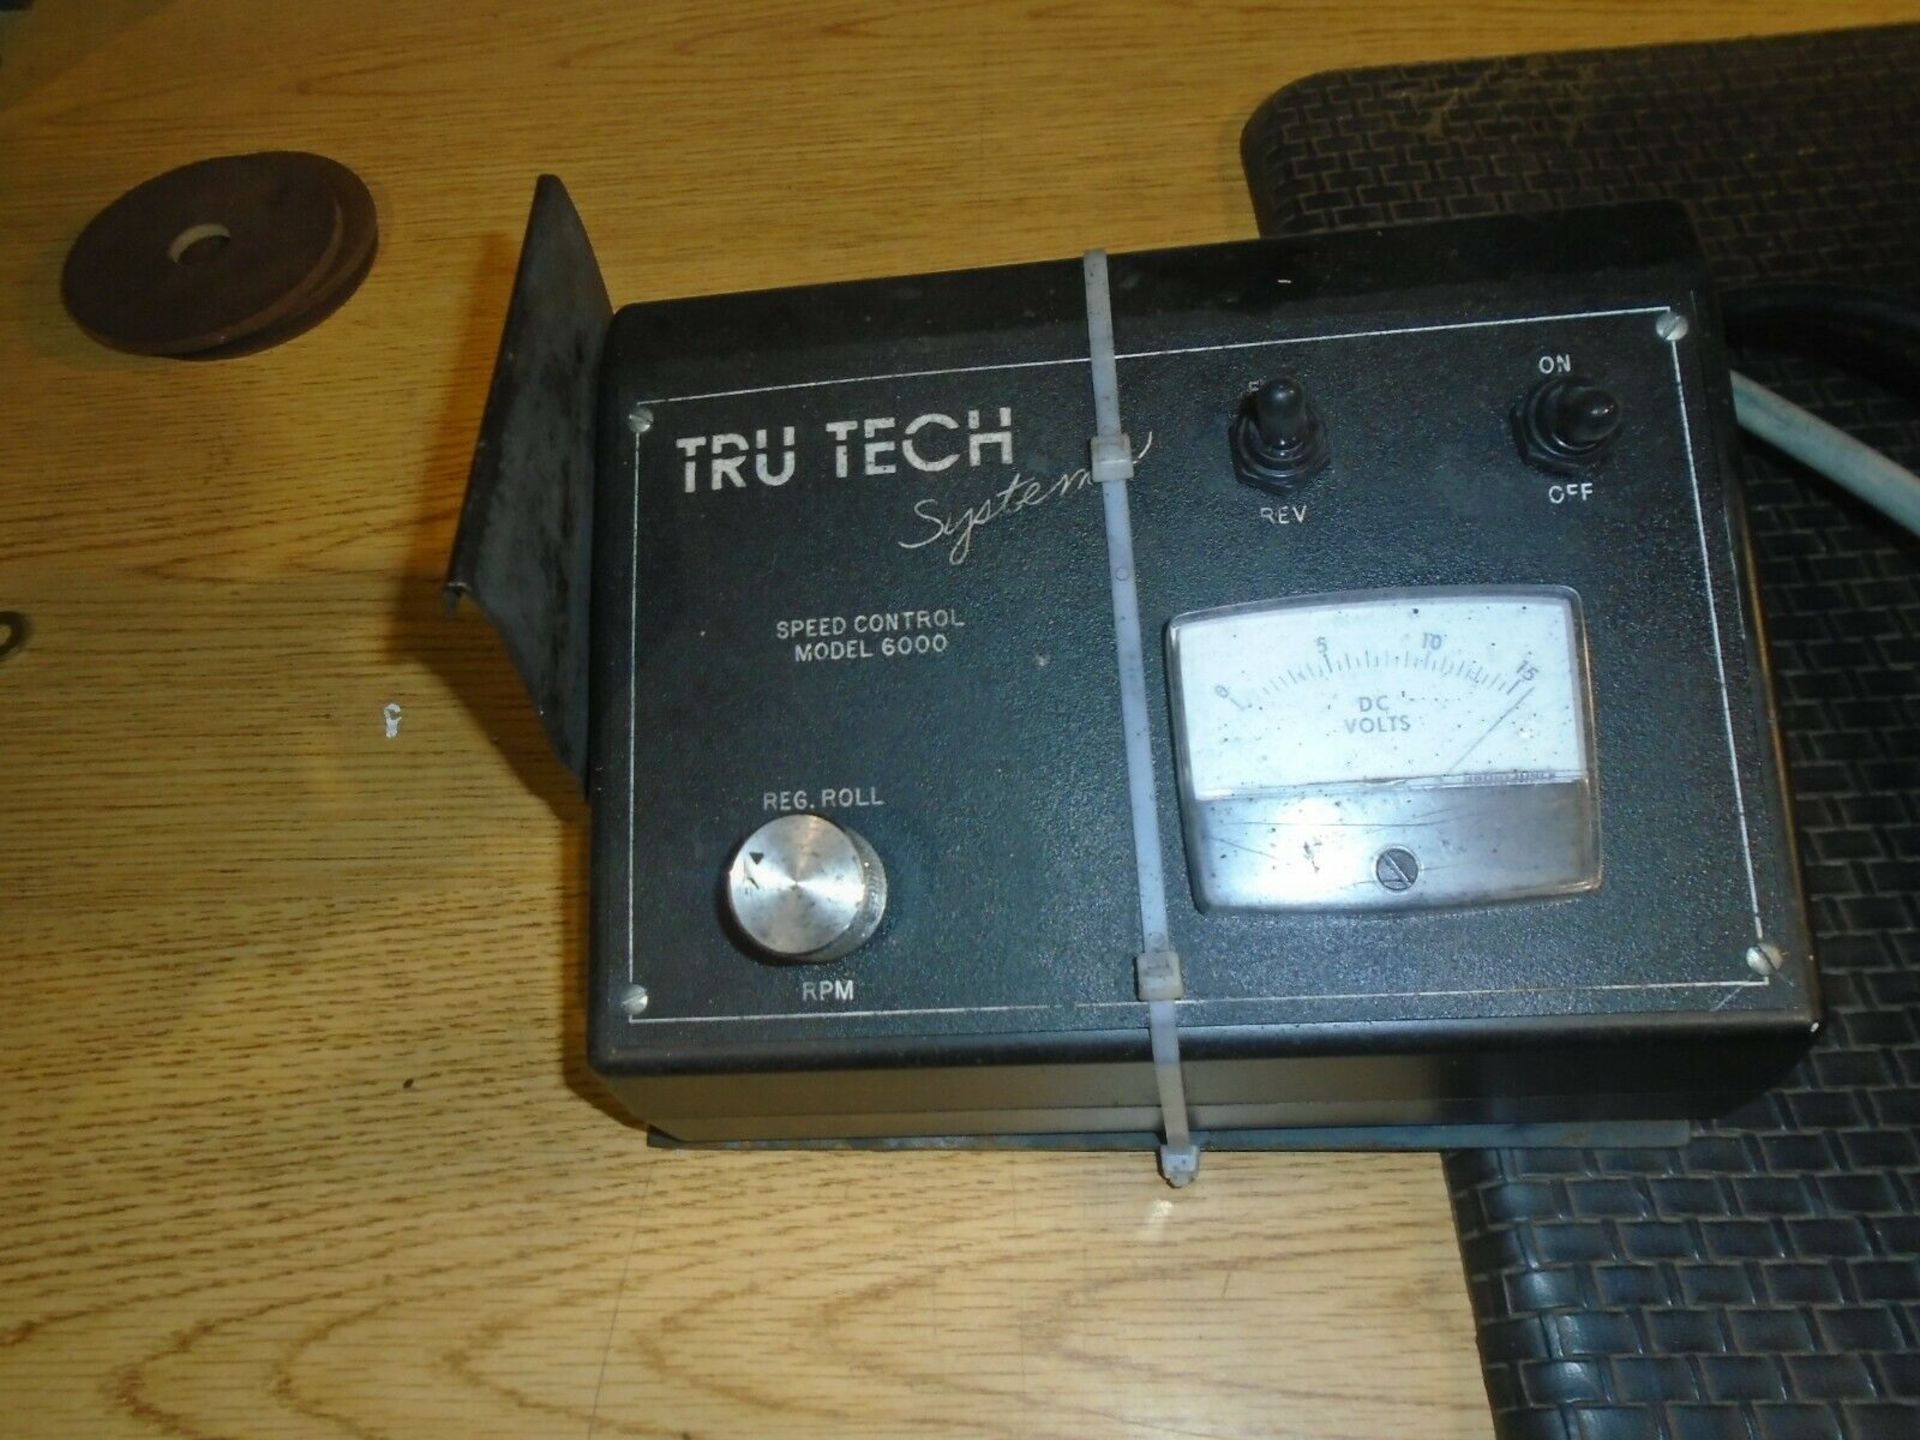 Tru Tech TT5000 Centerless Grinding Attachment With Speed Control 6000 - Image 5 of 6